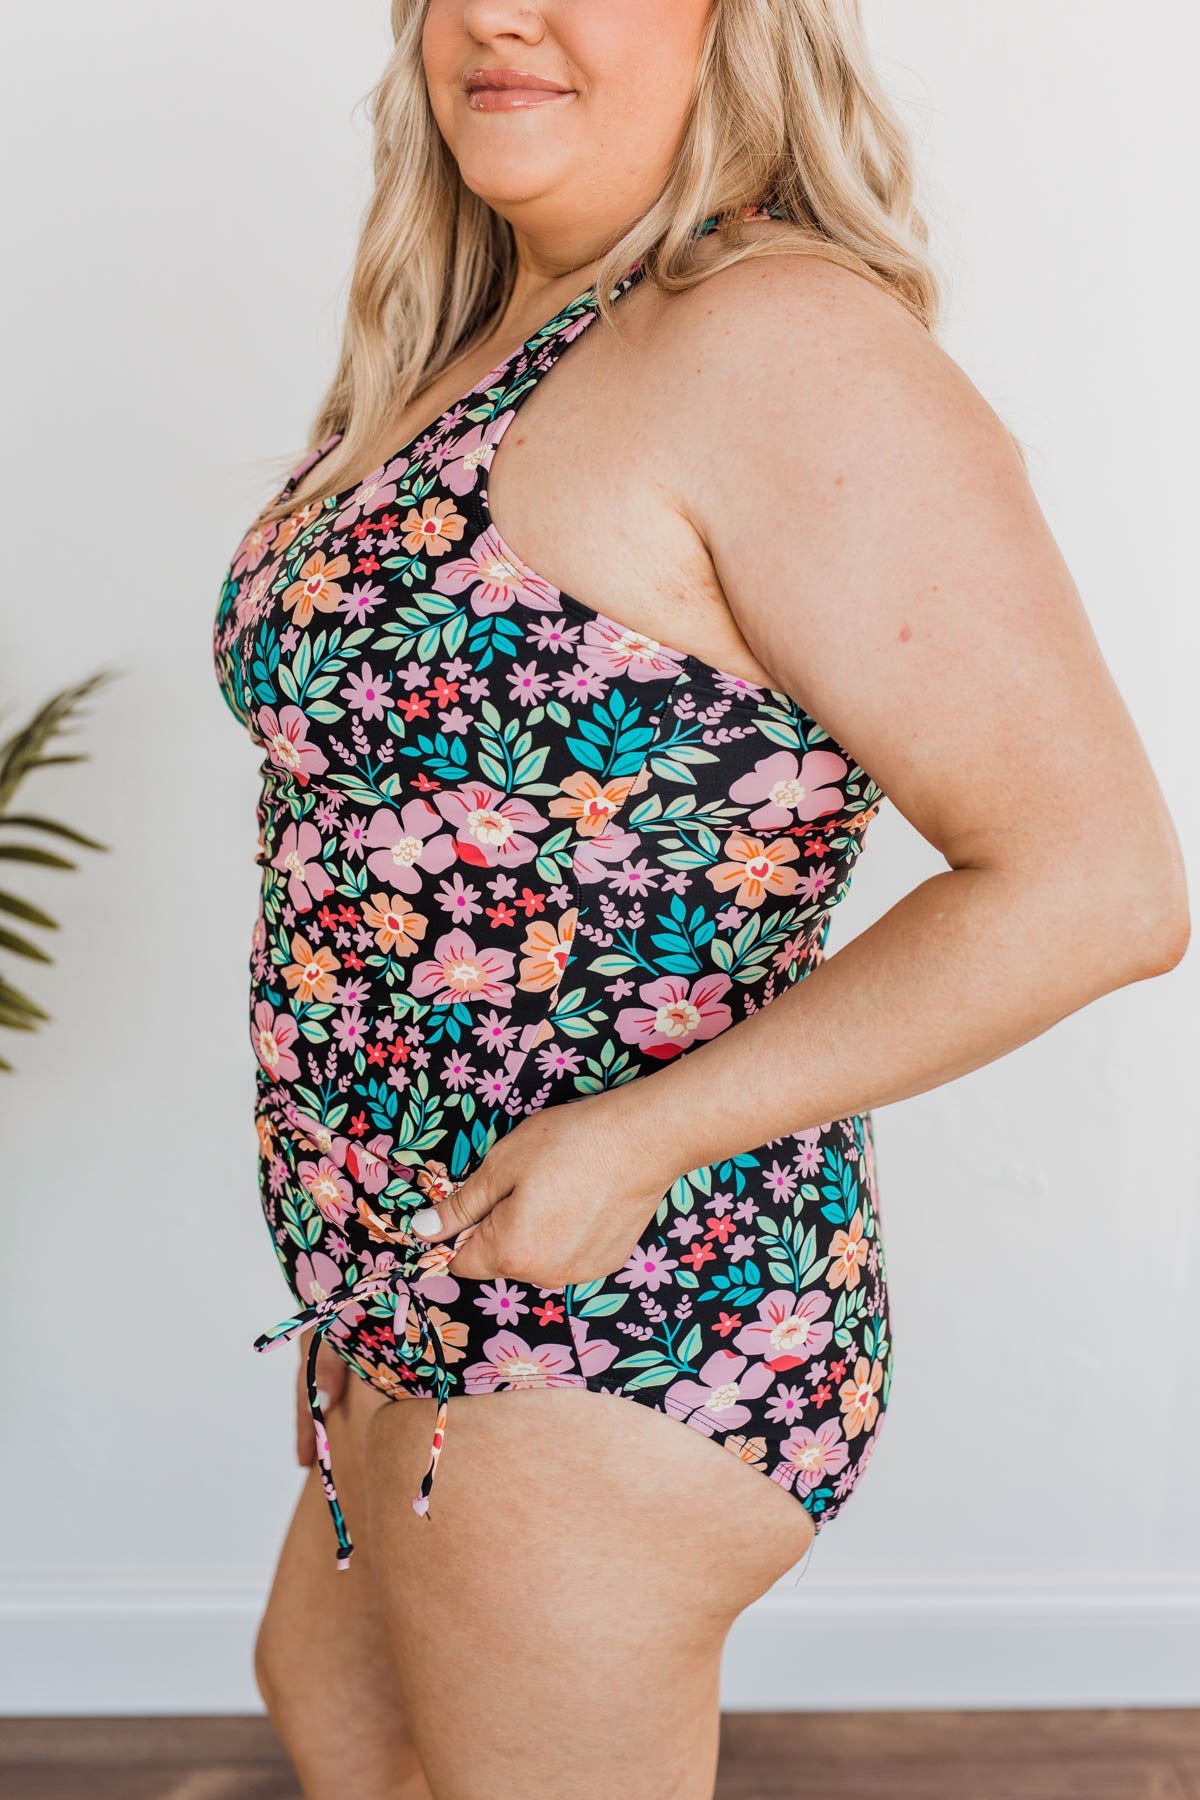 The Beach Is Calling Tankini Swim Top- Black Floral – The Pulse